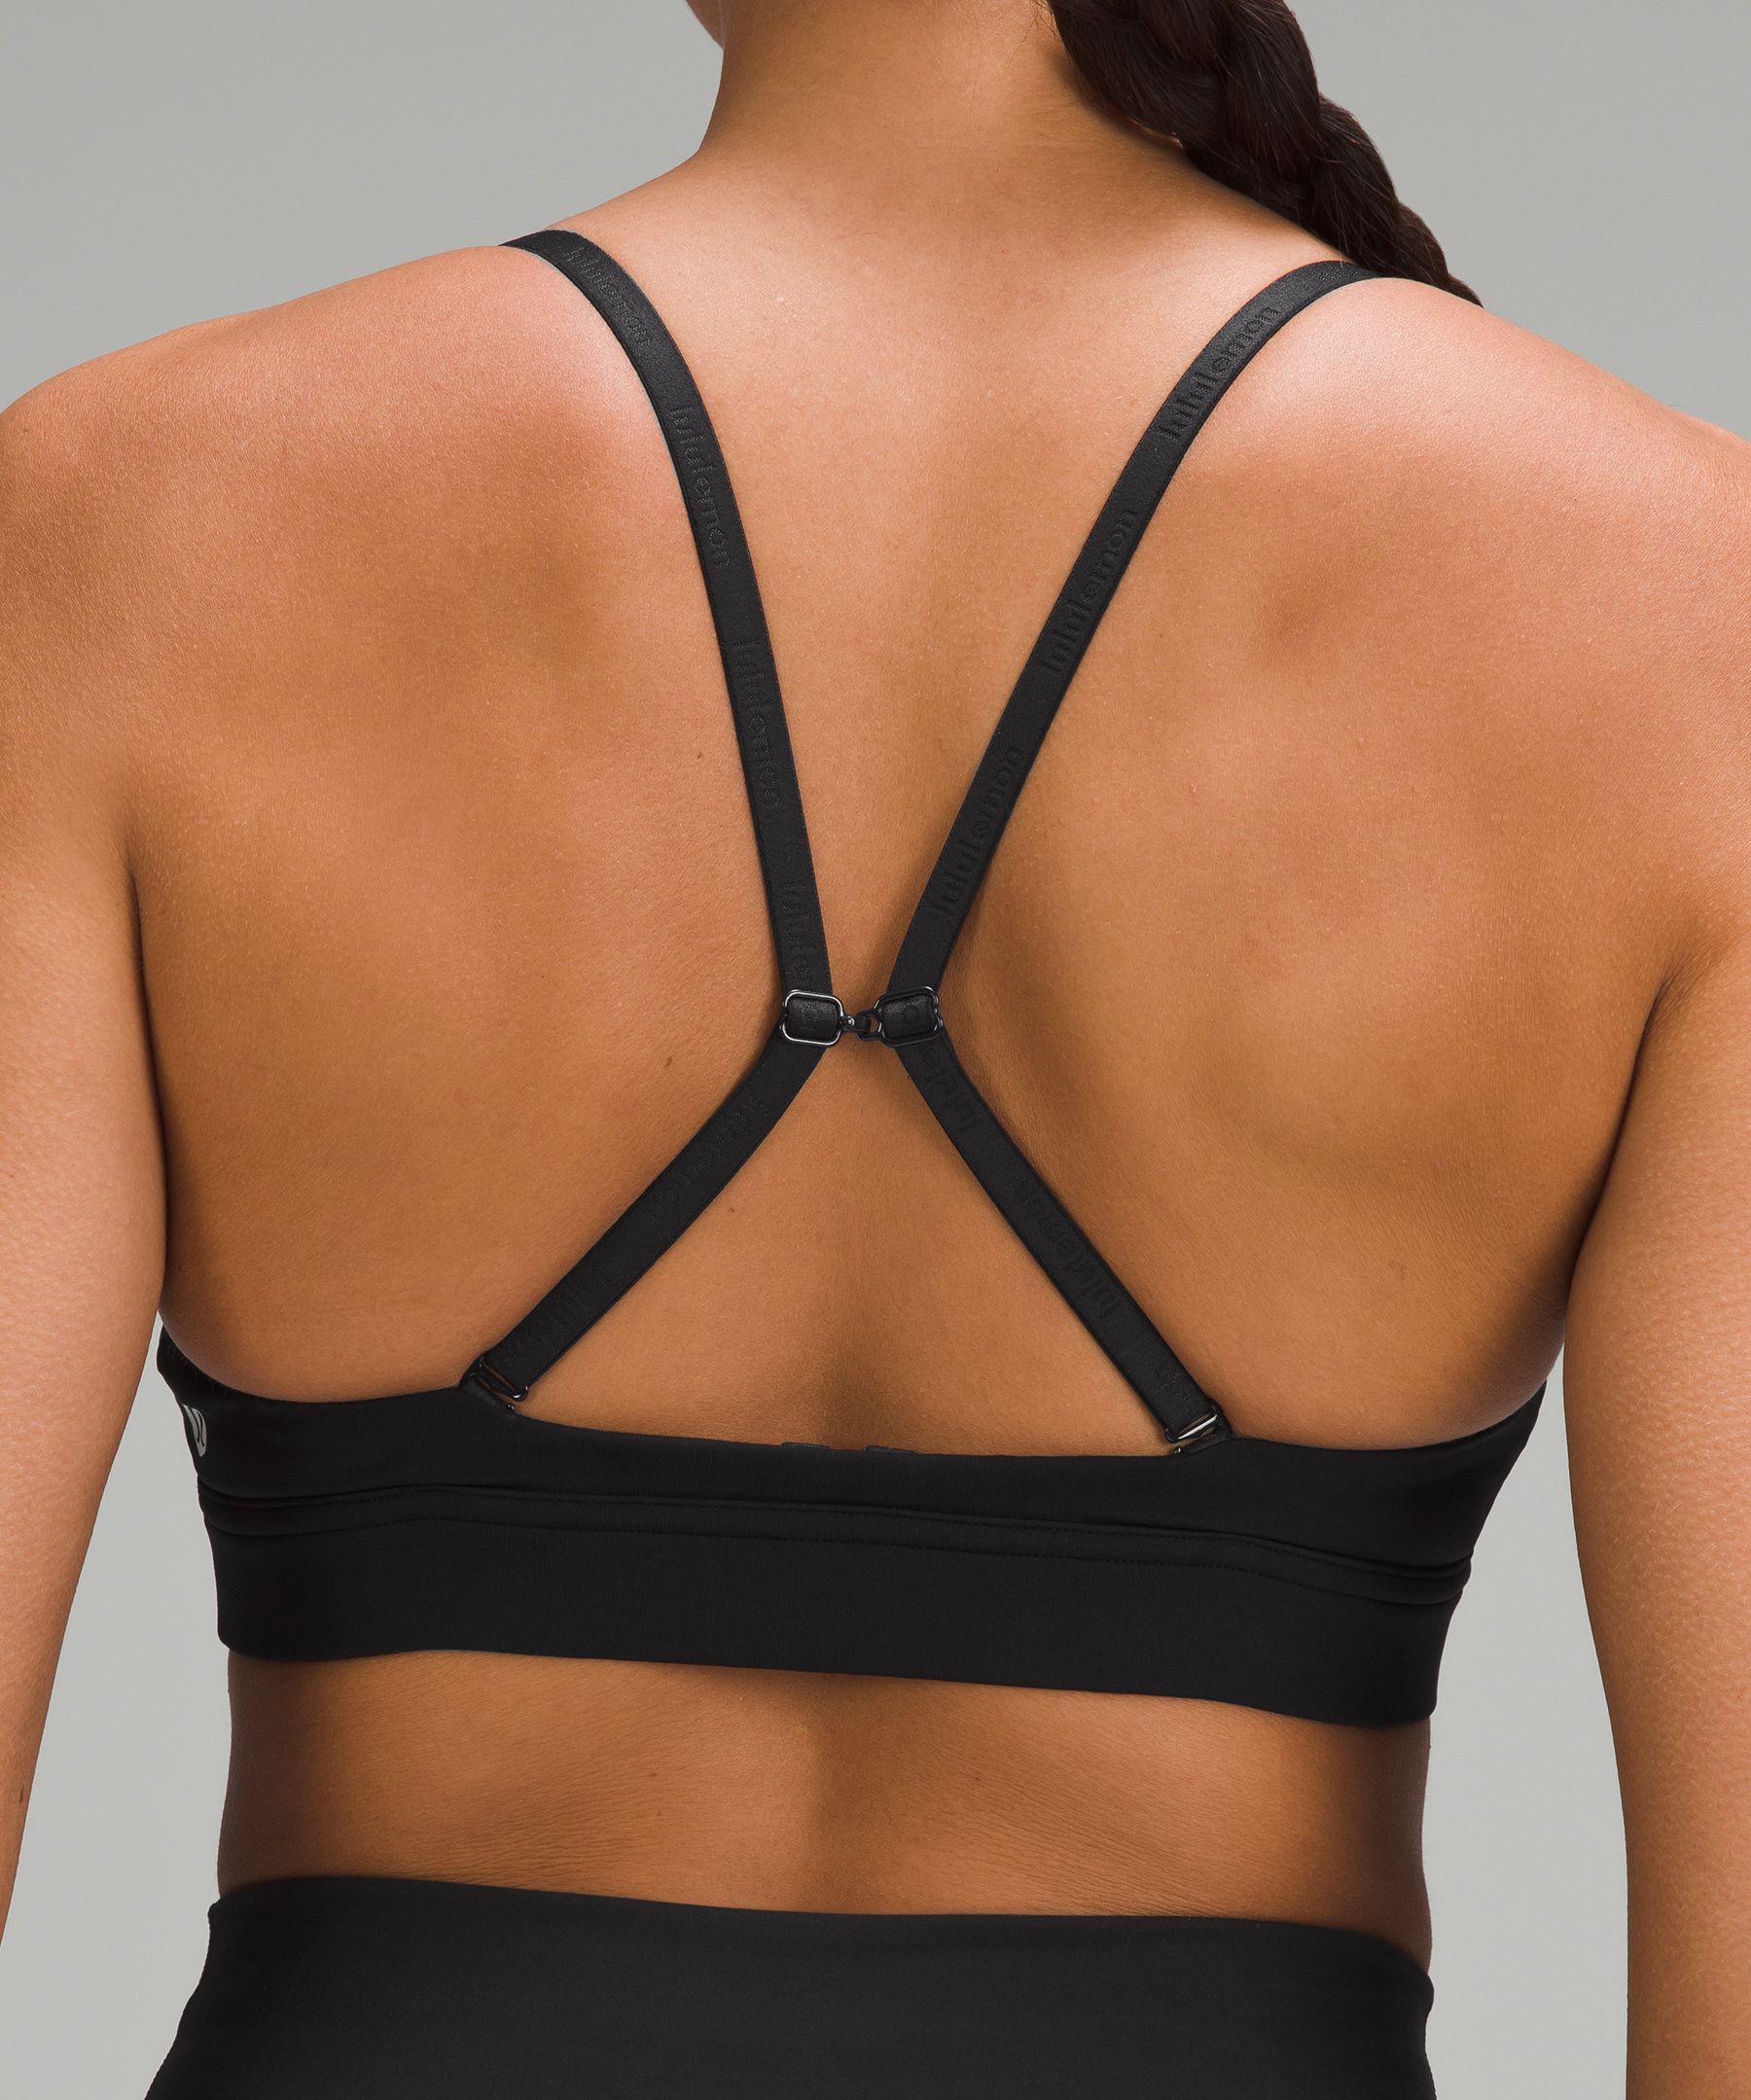 Lululemon athletica License to Train Triangle Bra Light Support, A/B Cup  *Graphic, Women's Bras